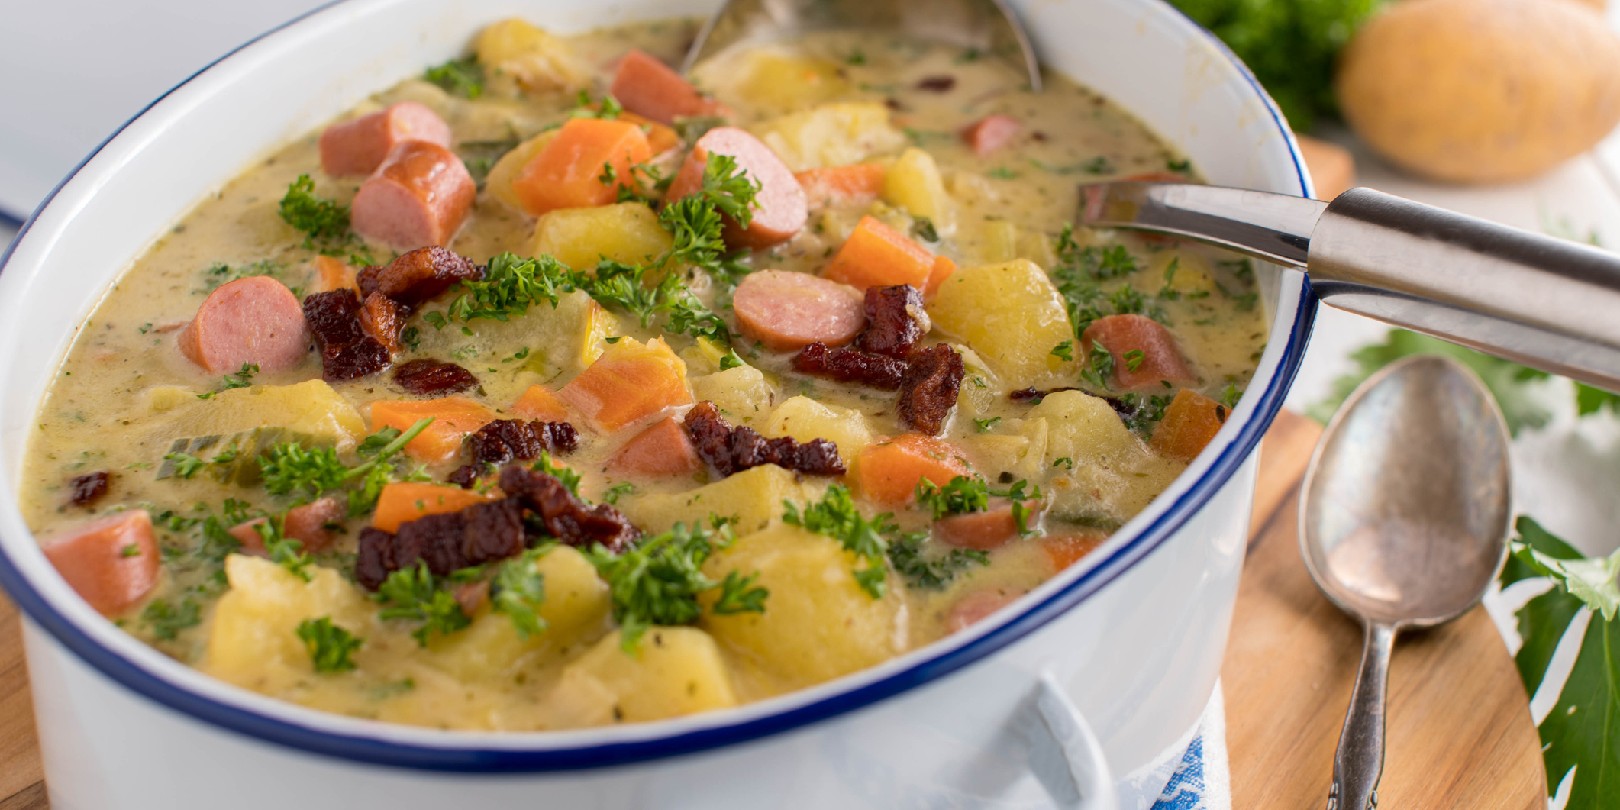 Homemade potato soup or potato stew with crispy bacon, vienna sausage and vegetables. Served in old fashione enamel pot on kitchen table background